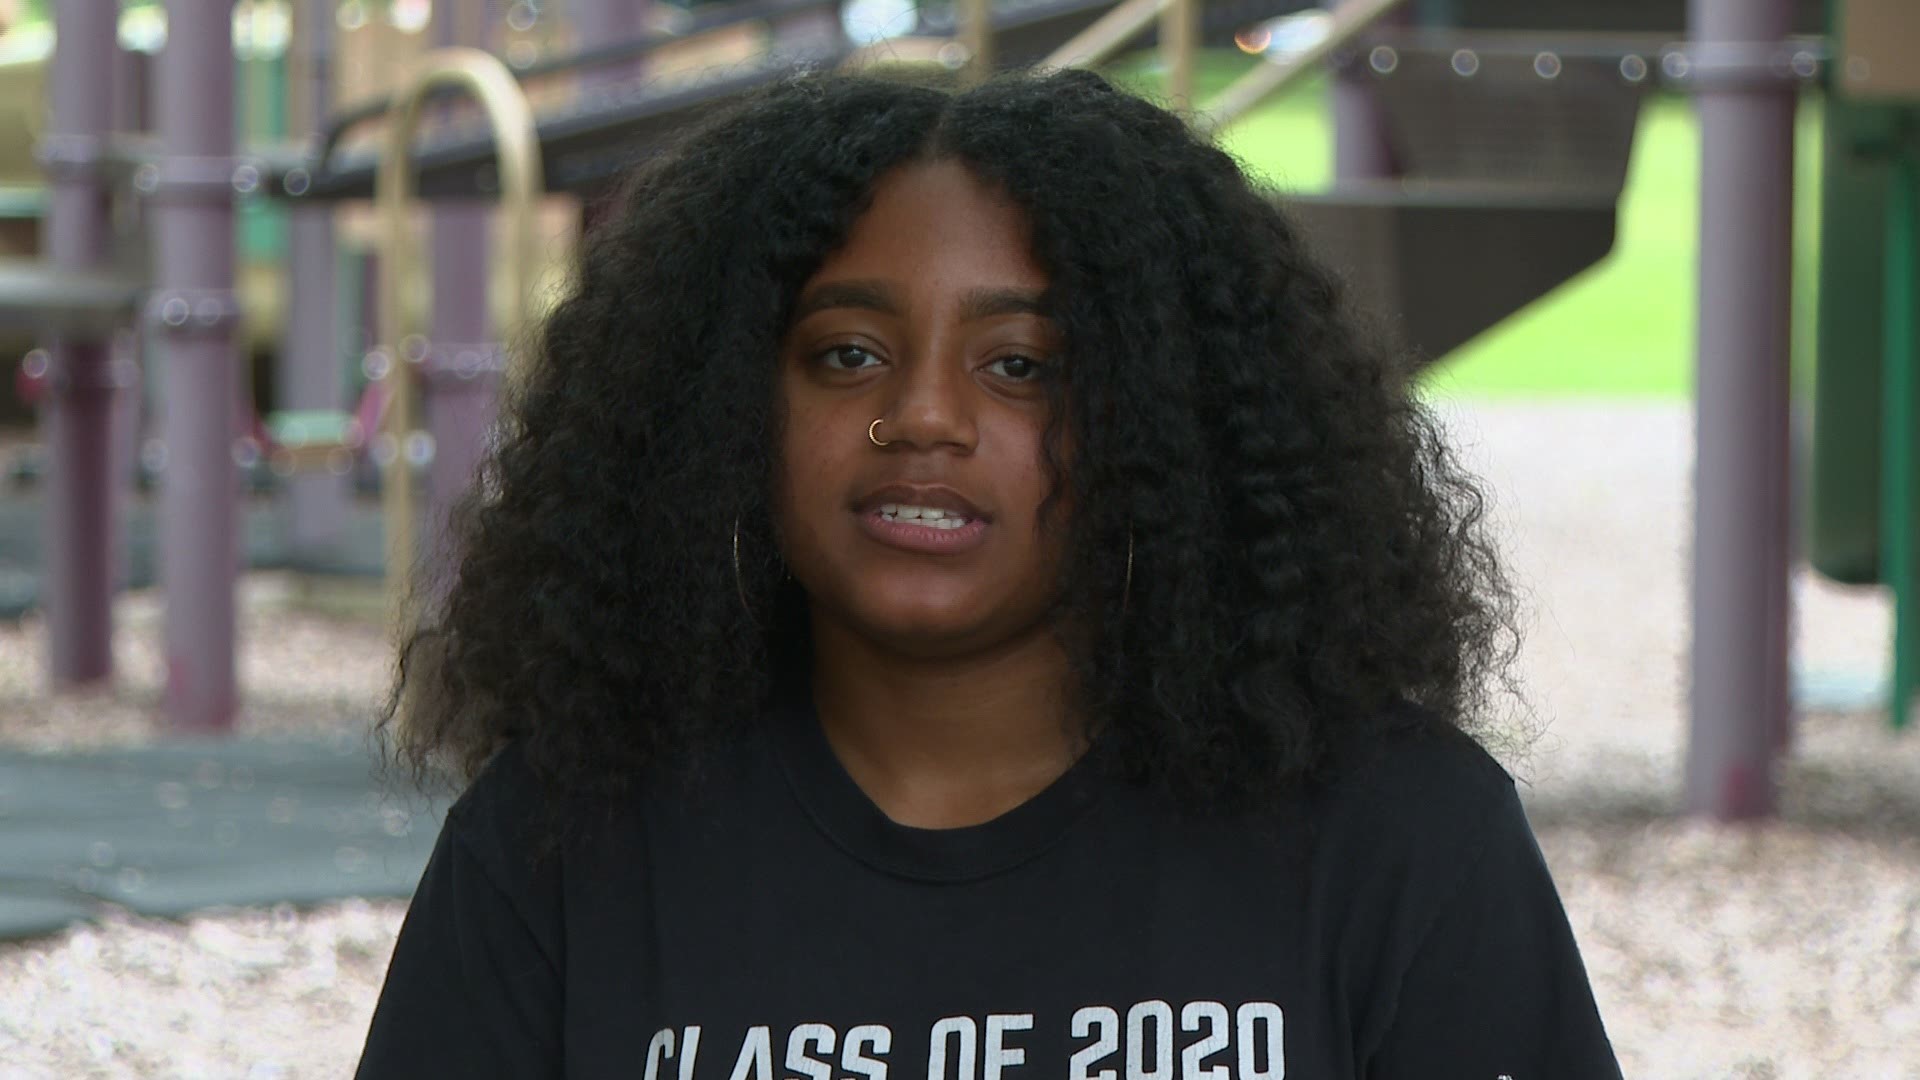 Aubri Stevenson says she doesn’t want to see a future where Louisville is divided by zip codes and immersed in crime.